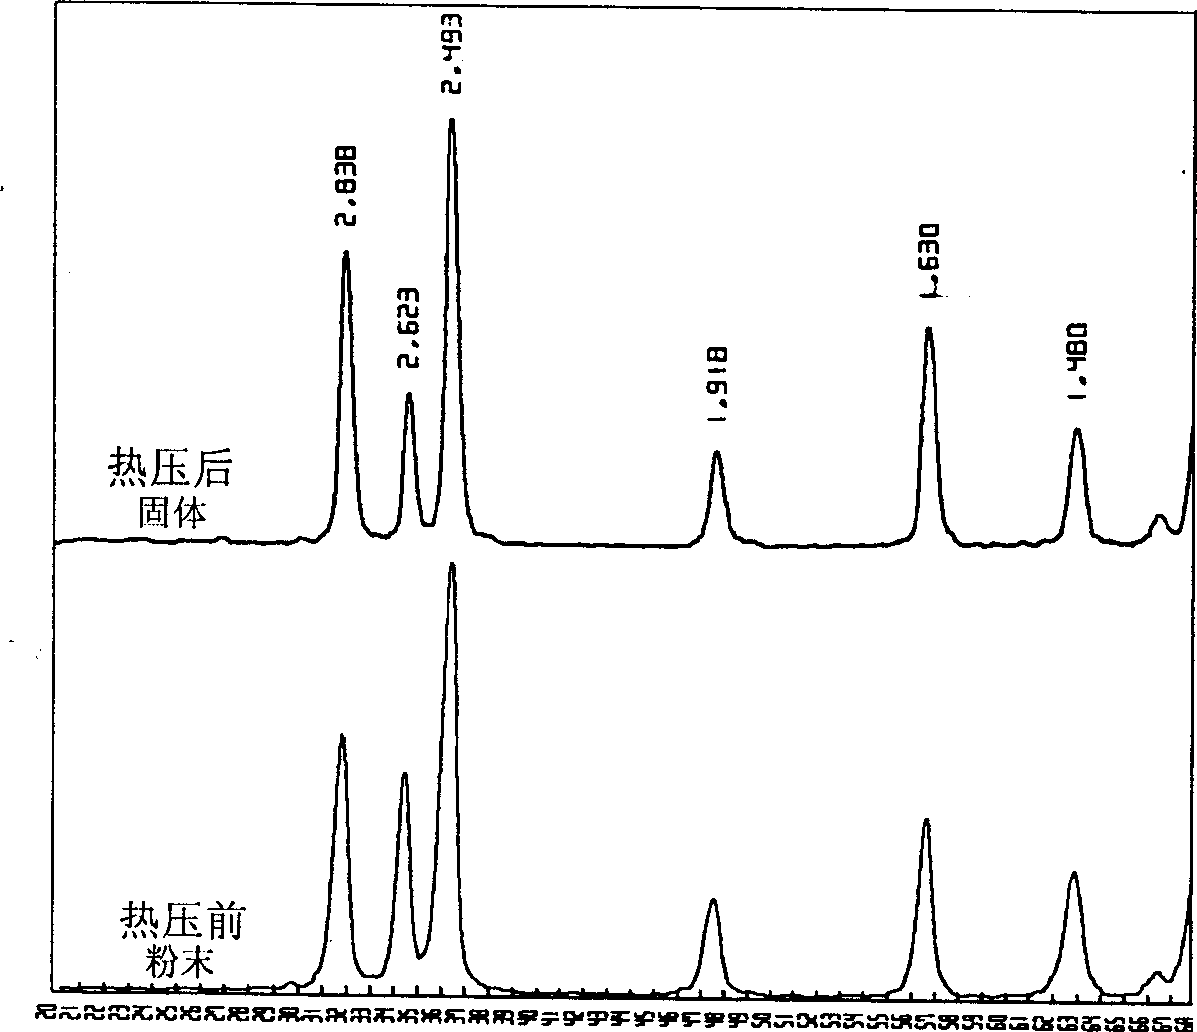 Method for preparing porous nano solid by using hot pressing technique through controllable vaporized solvent